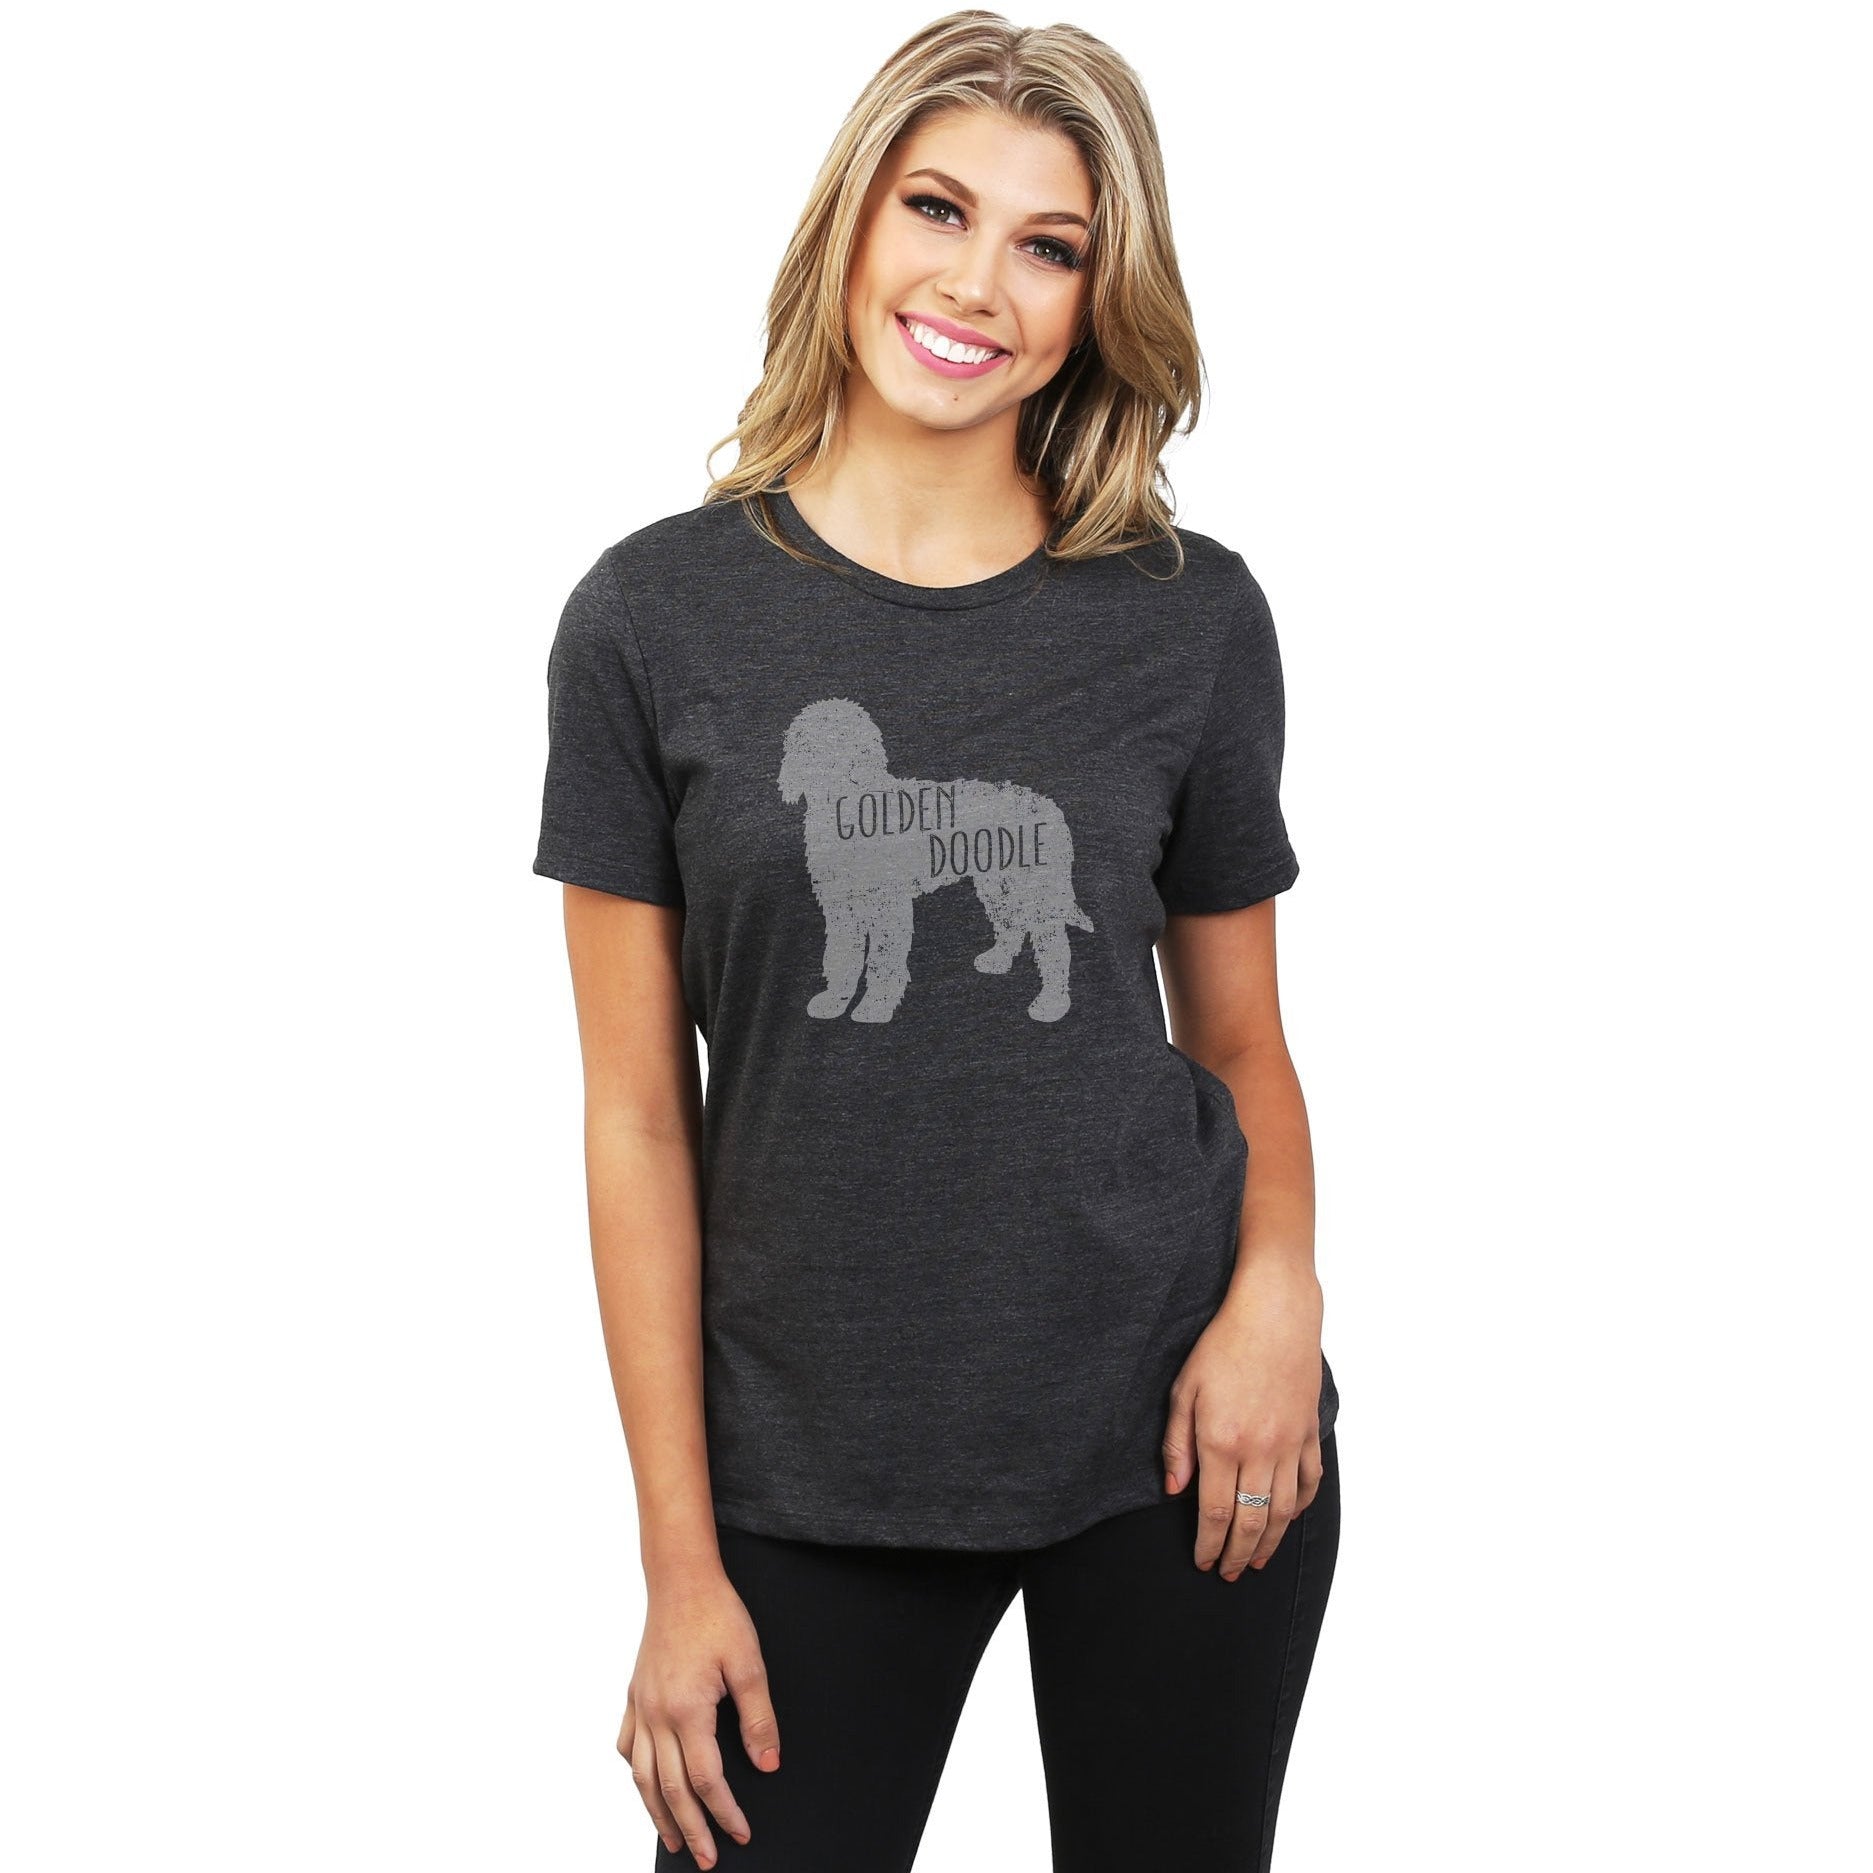 Golden Doodle Silhouette Women's Relaxed Crewneck T-Shirt Top Tee Charcoal Model
